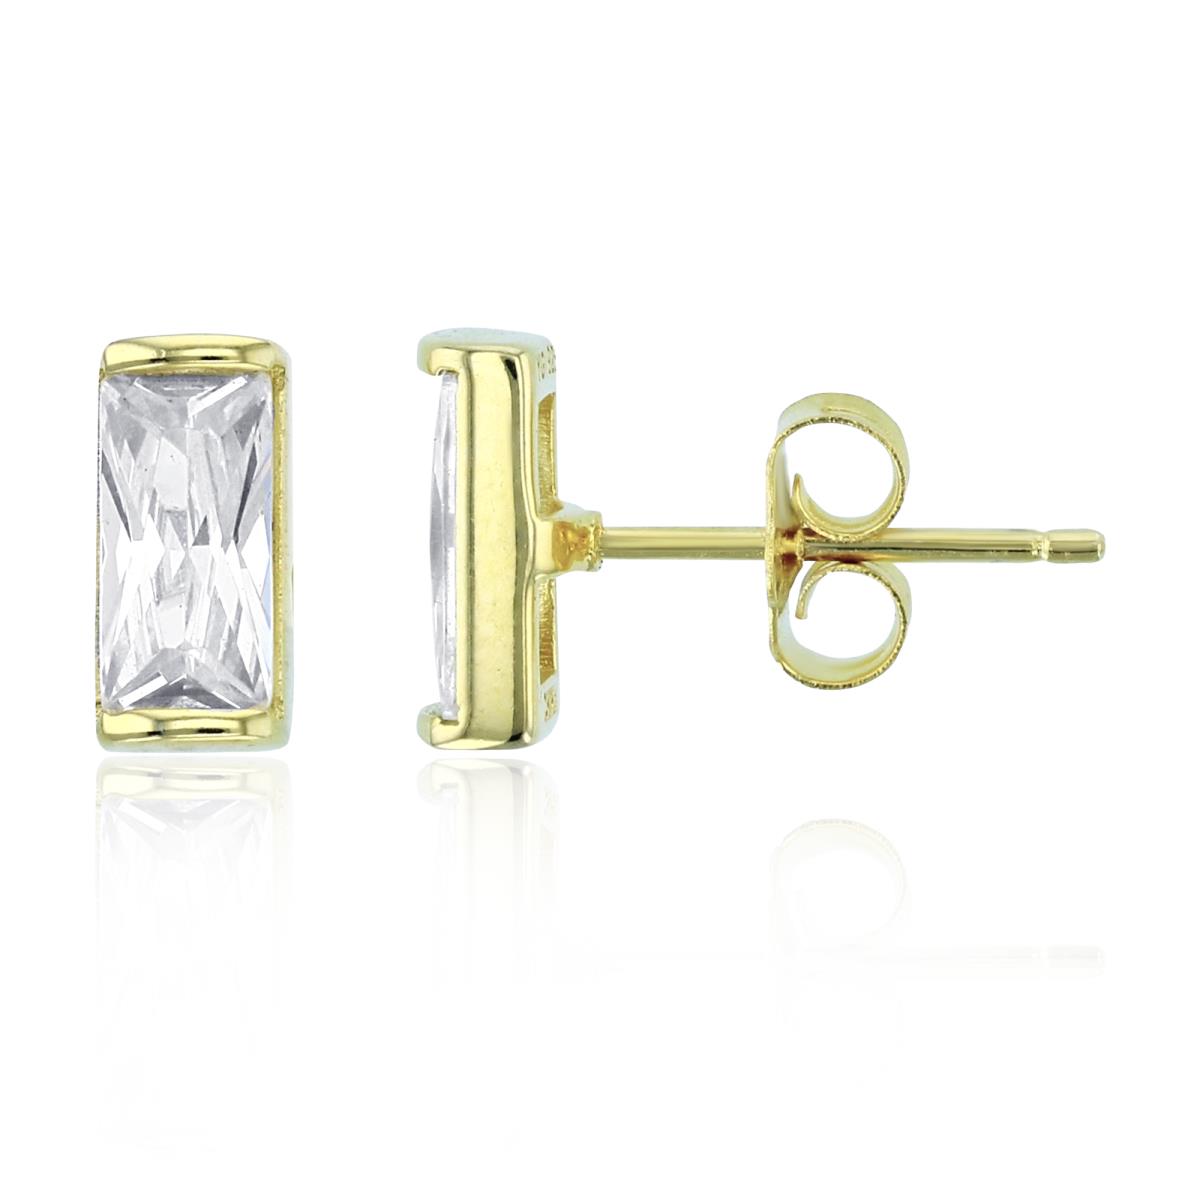 Sterling Silver+1Micron Yellow Gold 8x4mm Octagon CZ Studs